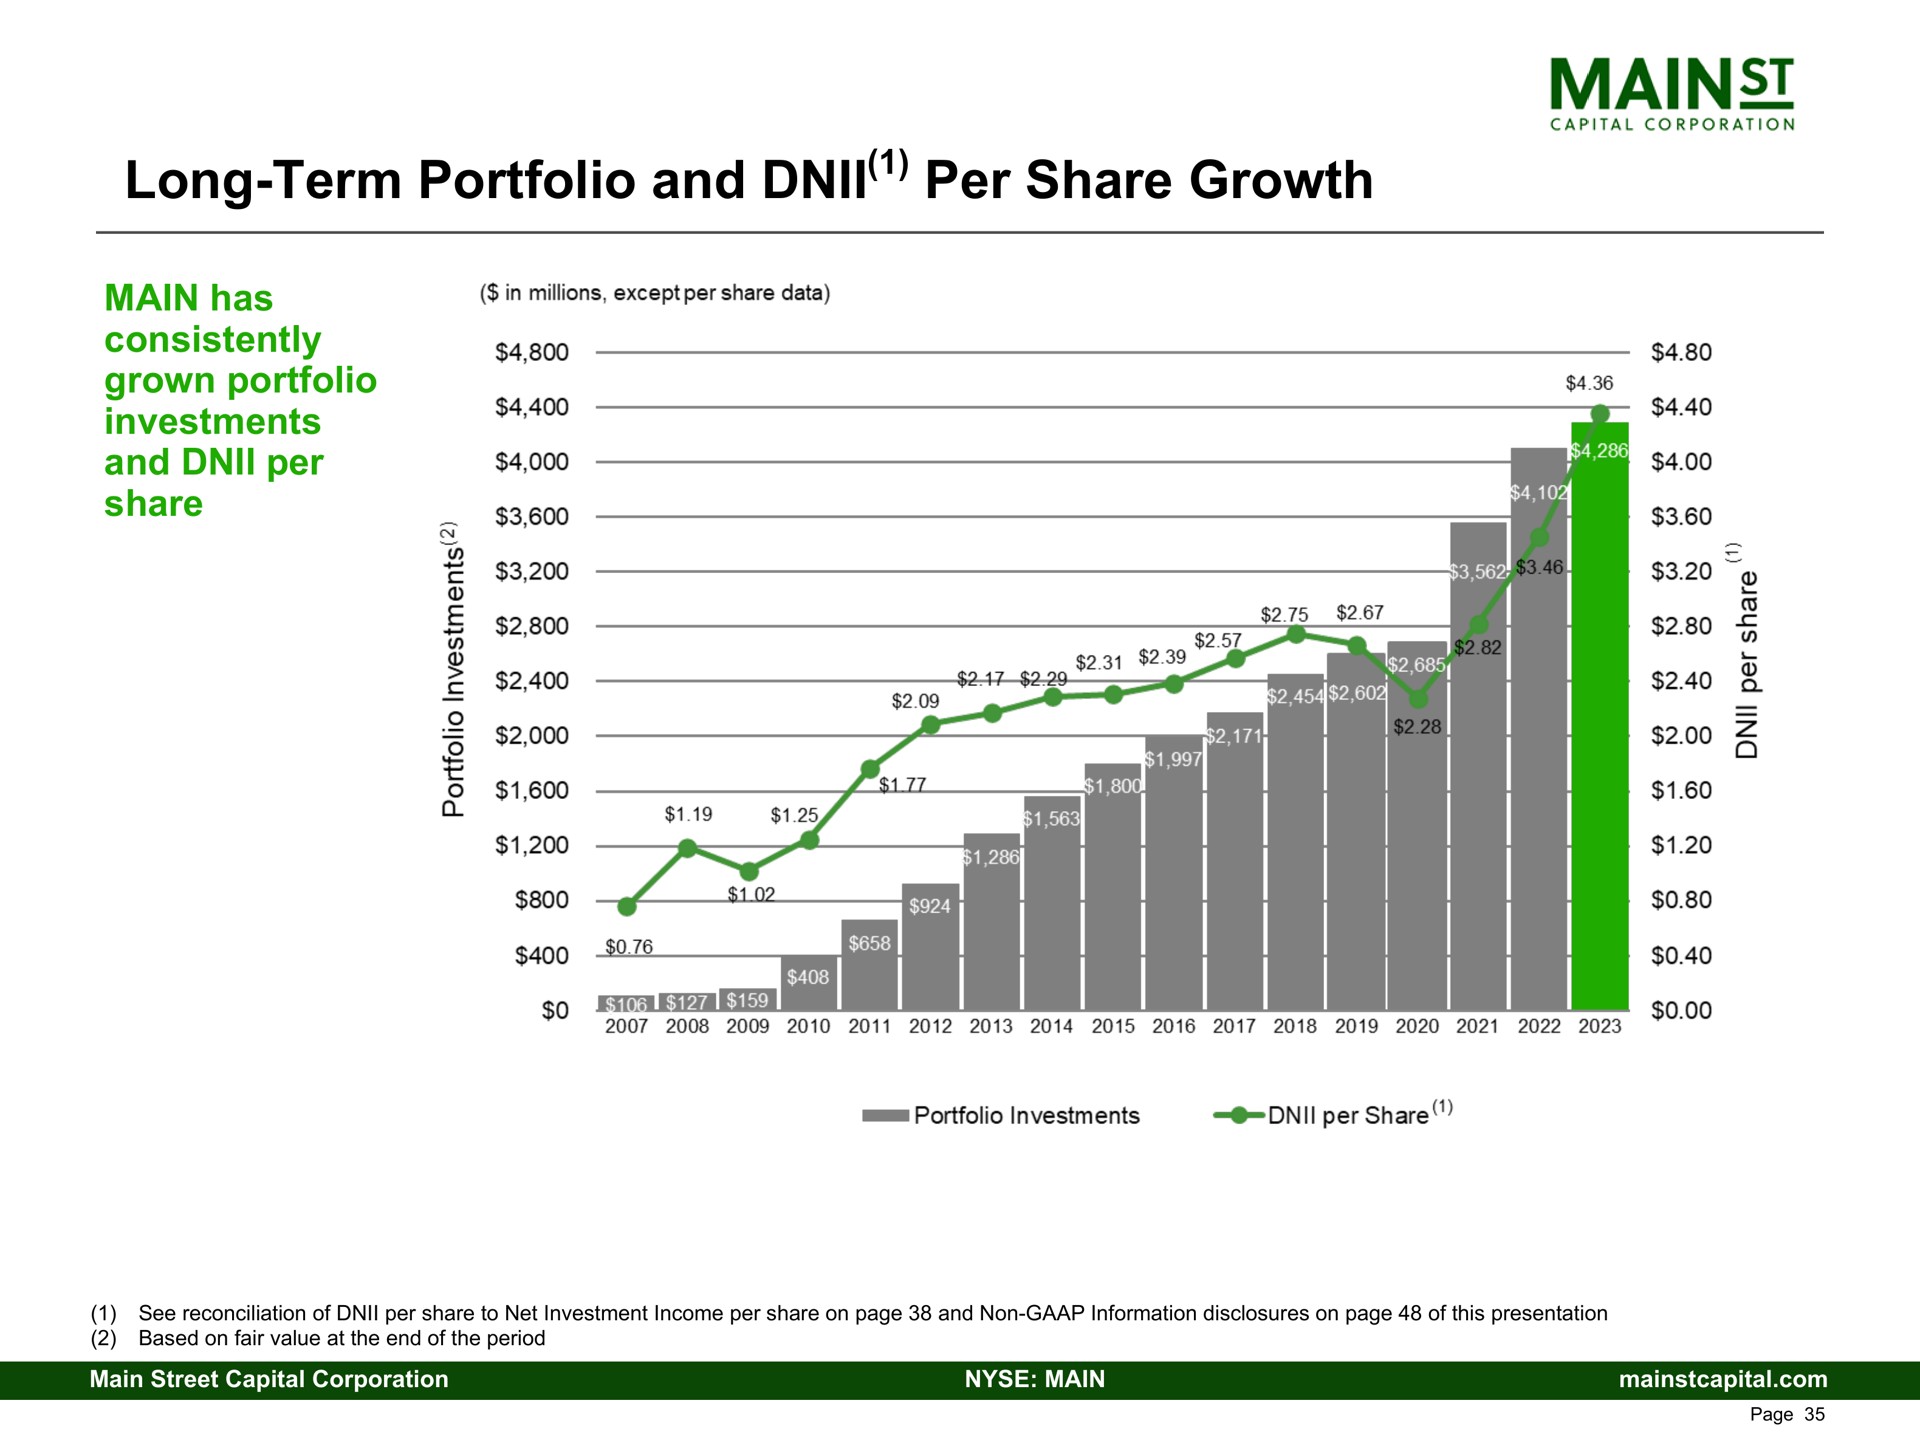 long term portfolio and per share growth investments a a it | Main Street Capital